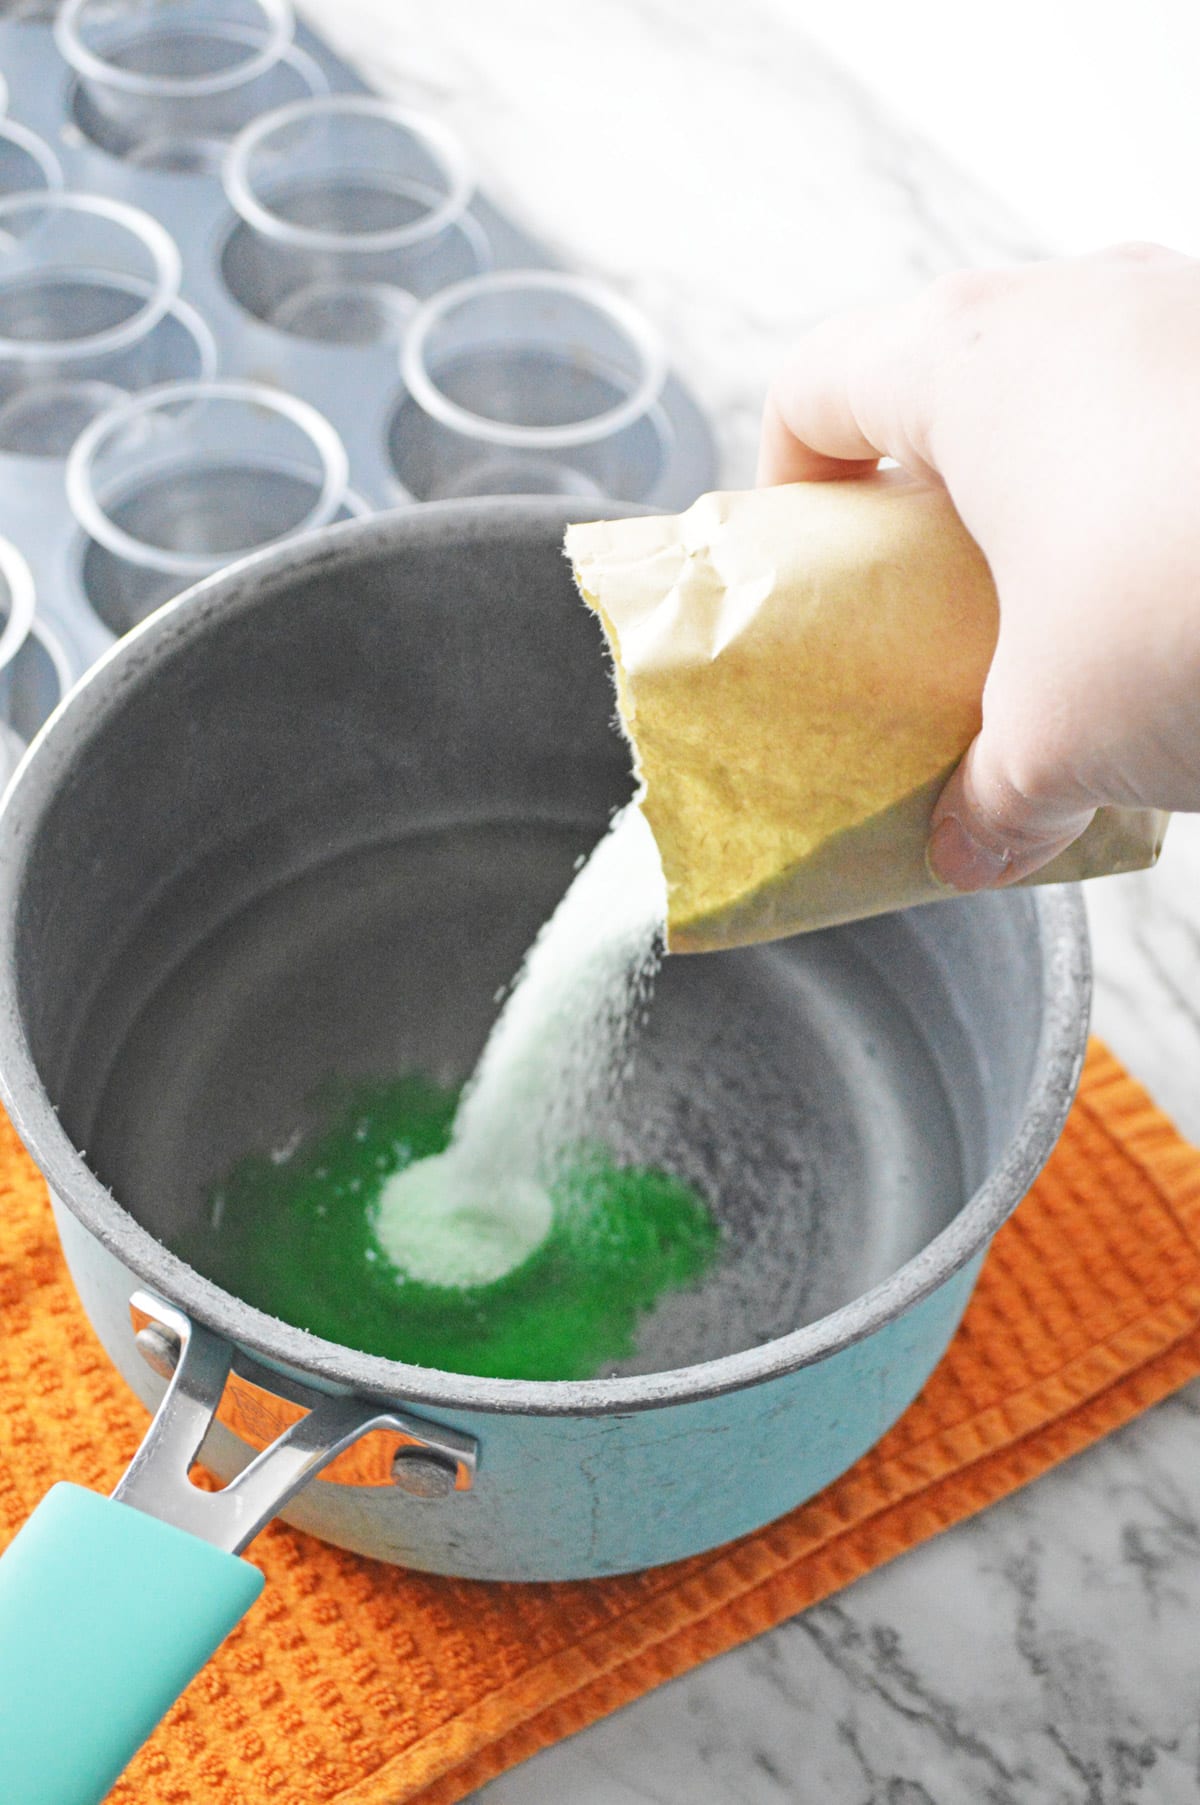 Pouring Jello mix into saucepan with water